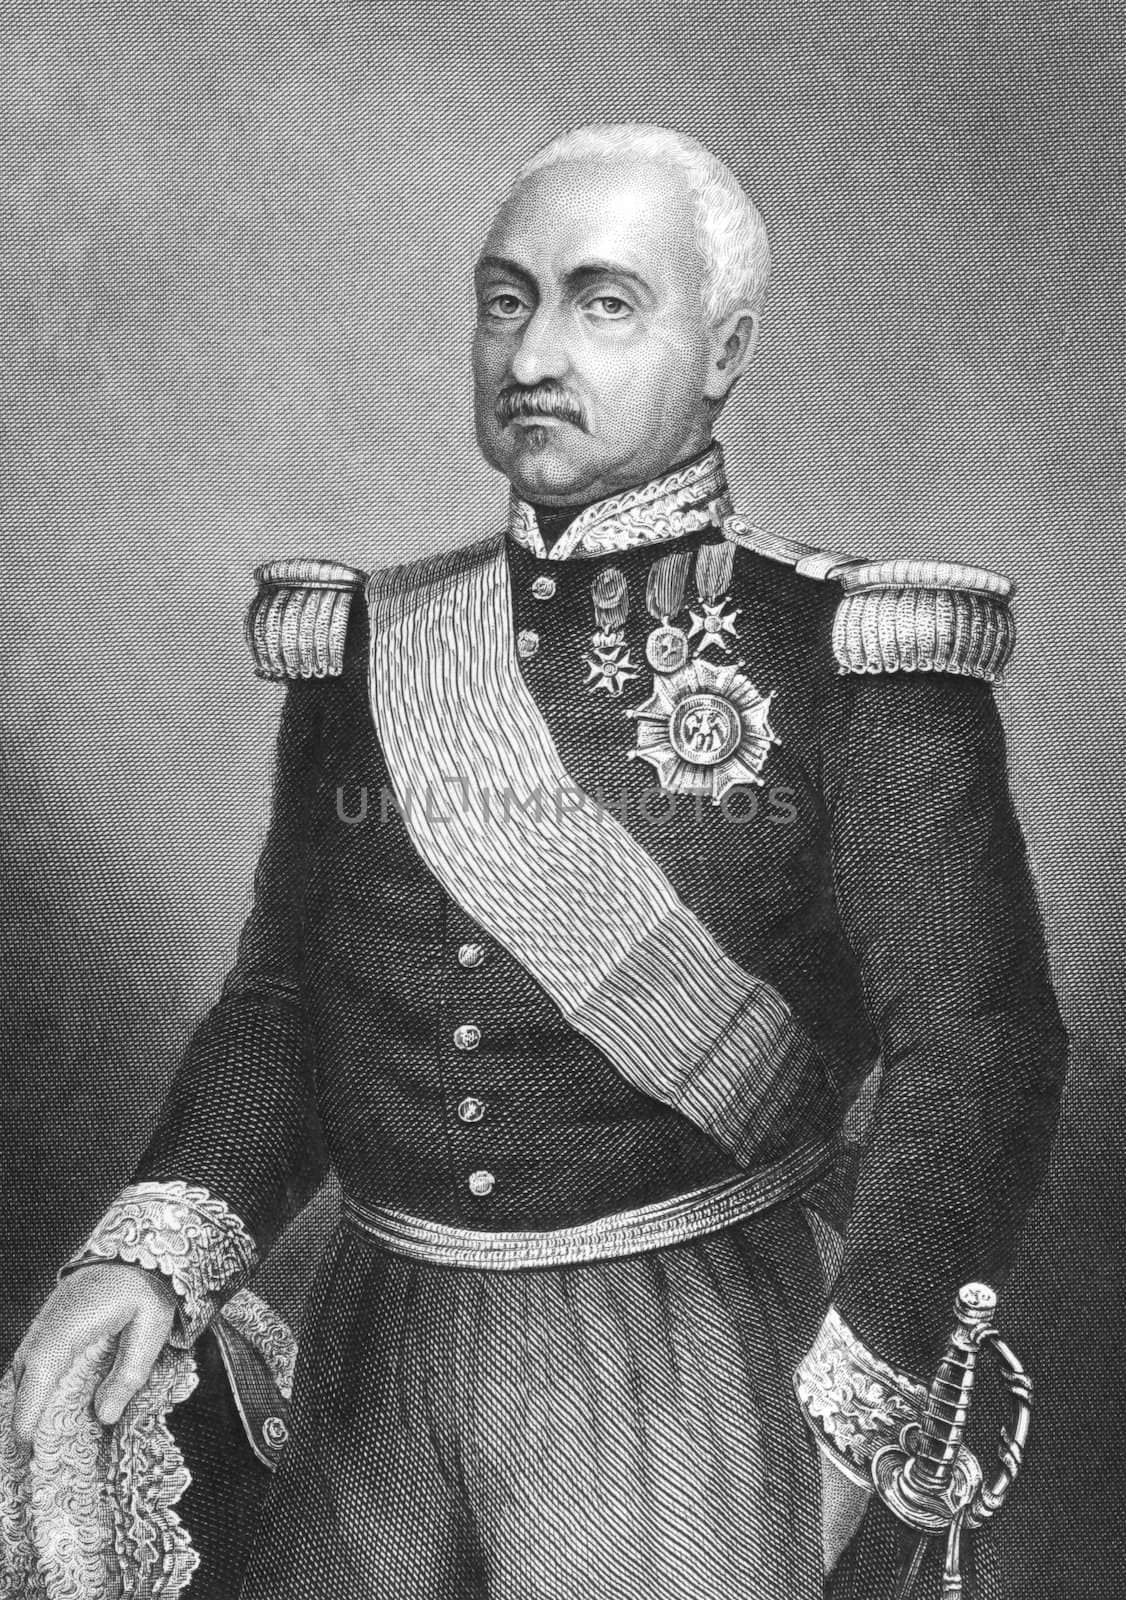 Aimable Pelissier, Duke of Malakhoff (1794-1864) on engraving from the 1800s. French marshal. Engraved by D.J. Pound.